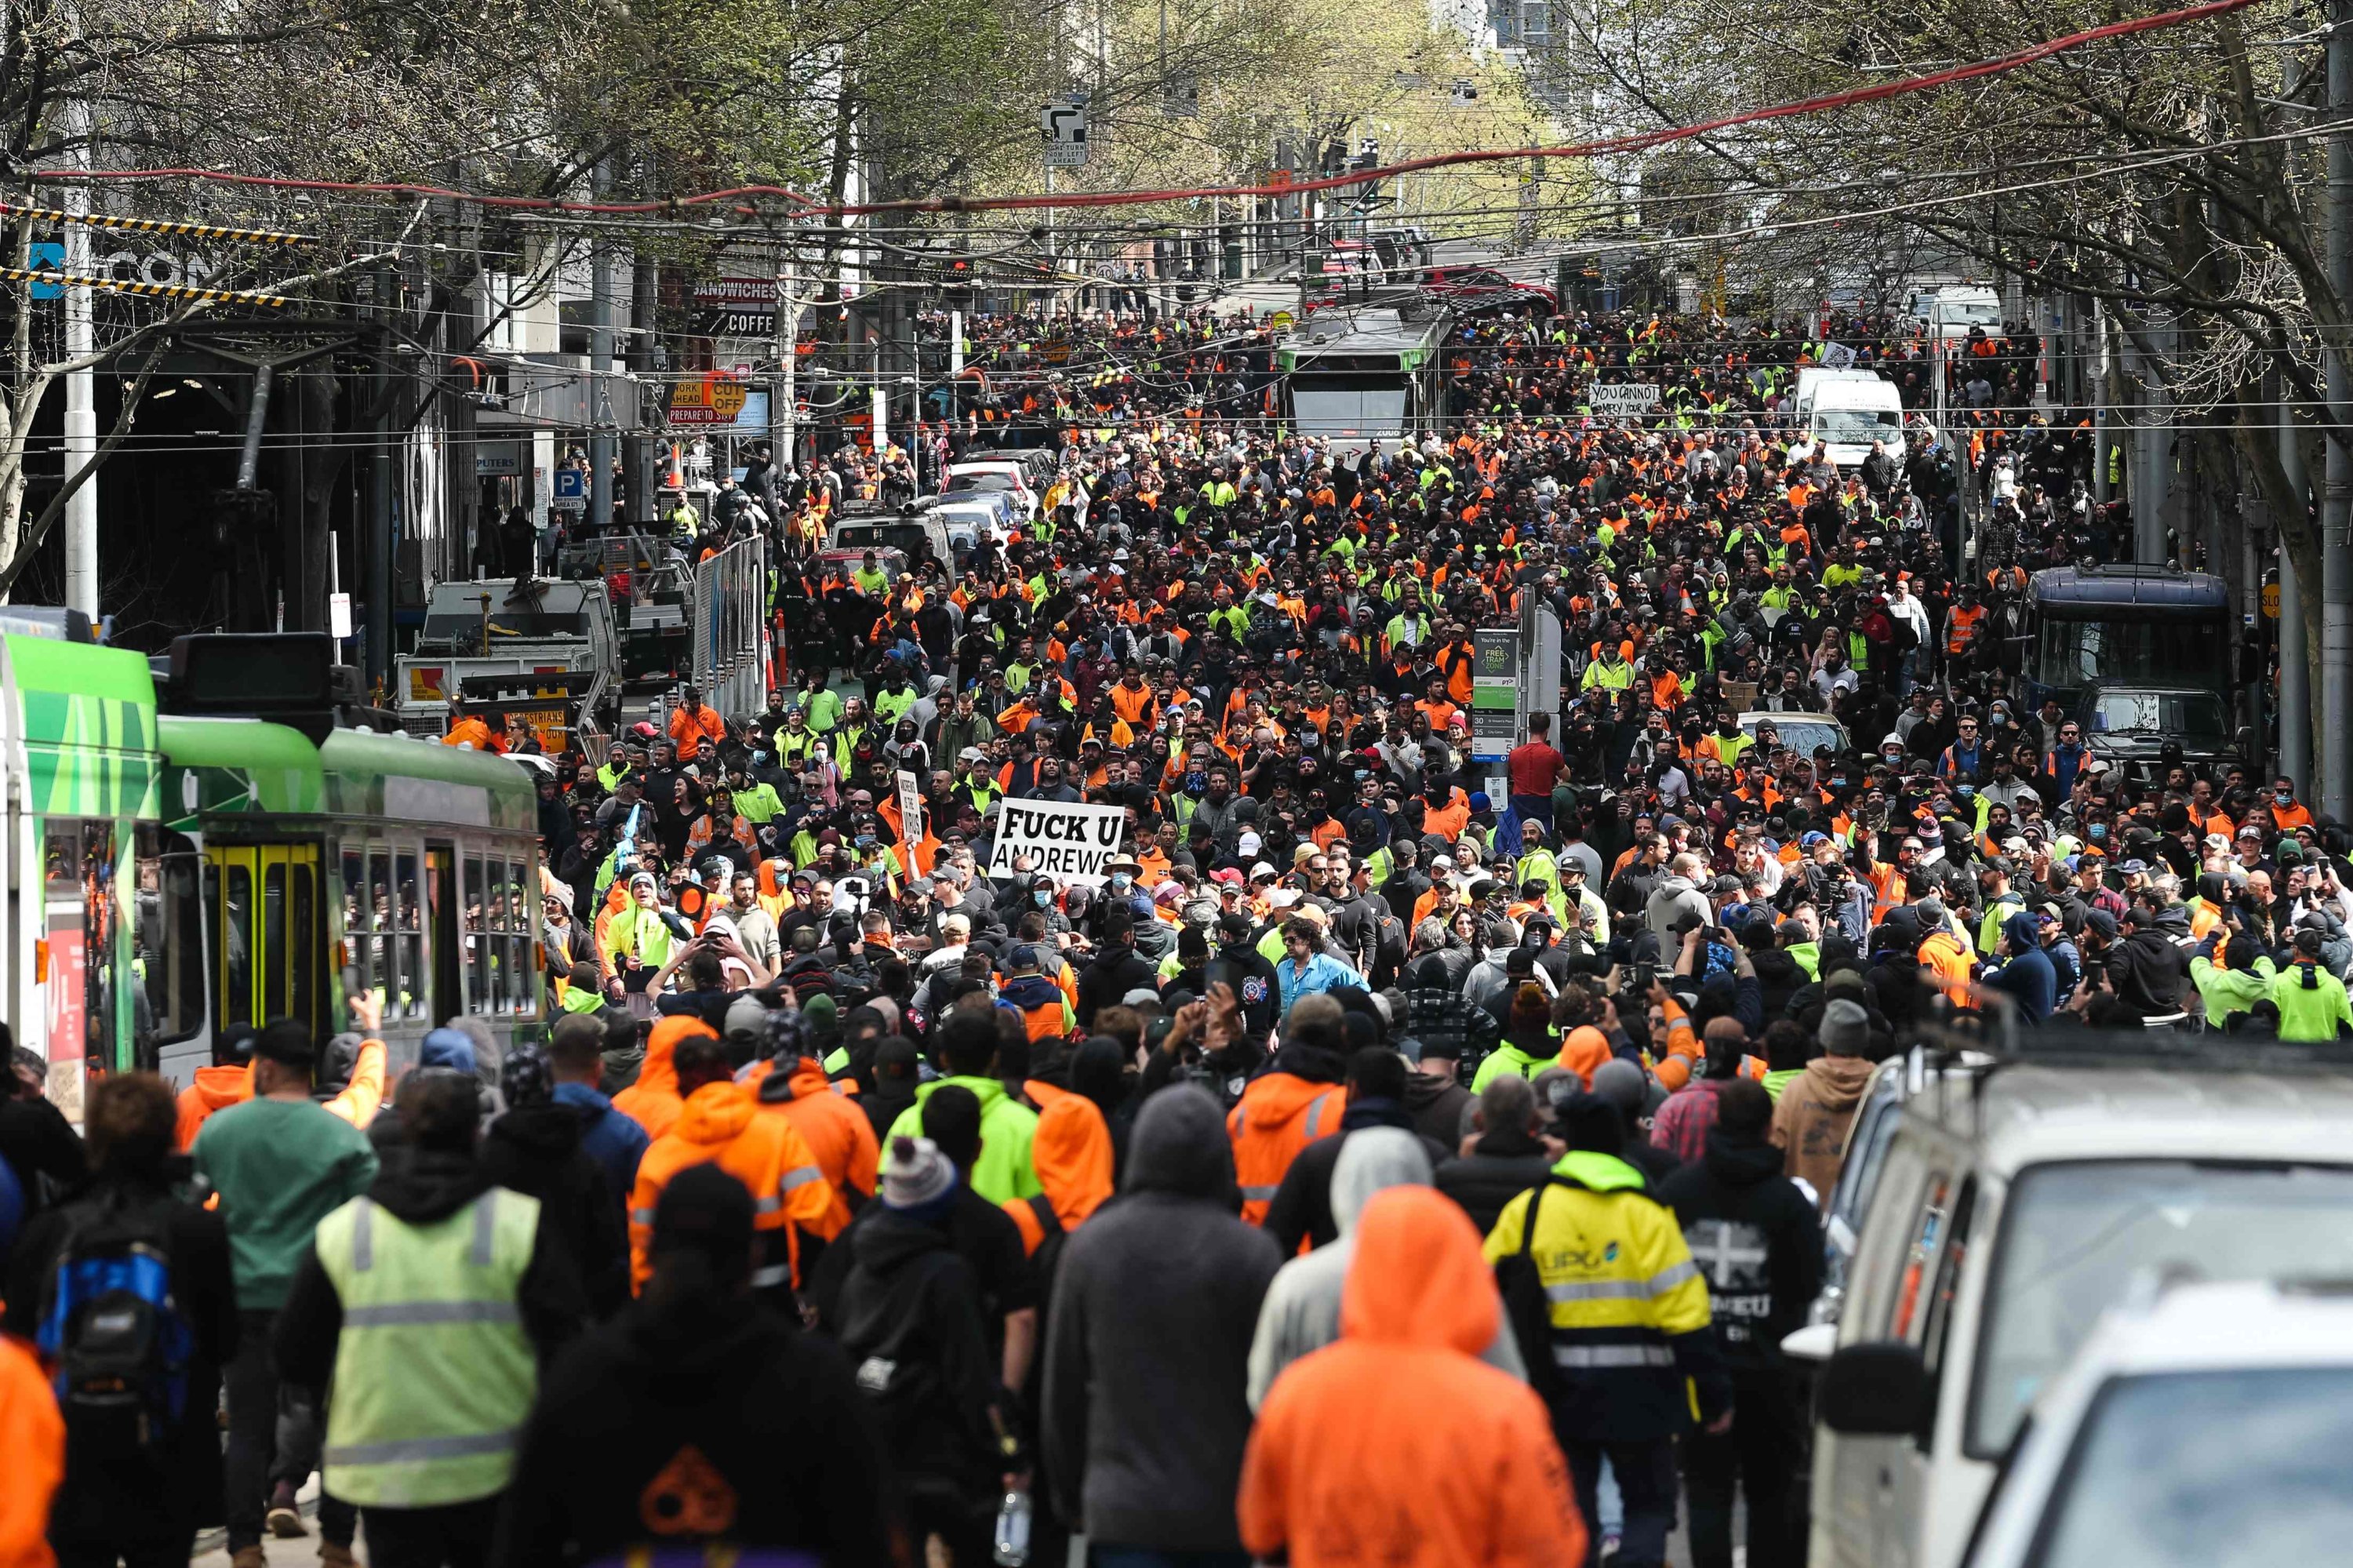 Construction workers and demonstrators attend a protest against COVID-19 regulations in Melbourne, Australia, on Sept. 21, 2021. (AFP Photo)